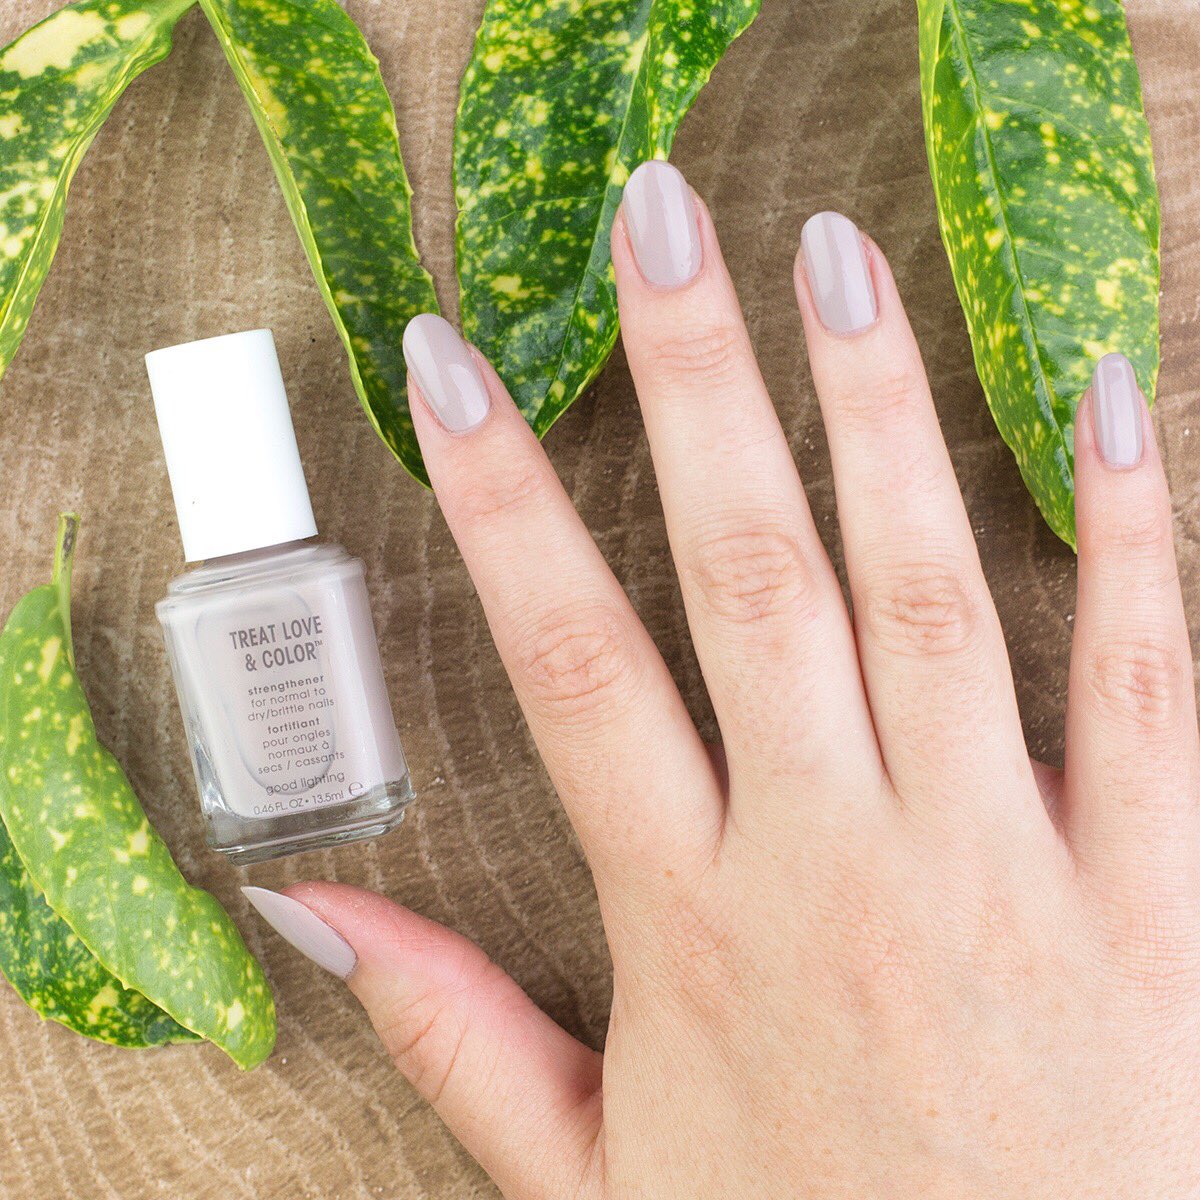 karakterisere Forlænge hjemmehørende Jennifer Dye on Twitter: "This is @essie Treat Love Color in Good Lighting,  one of the 4 new full coverage shades added to the line. This is two super  easy coats! https://t.co/u7Gkx9W1JX" /